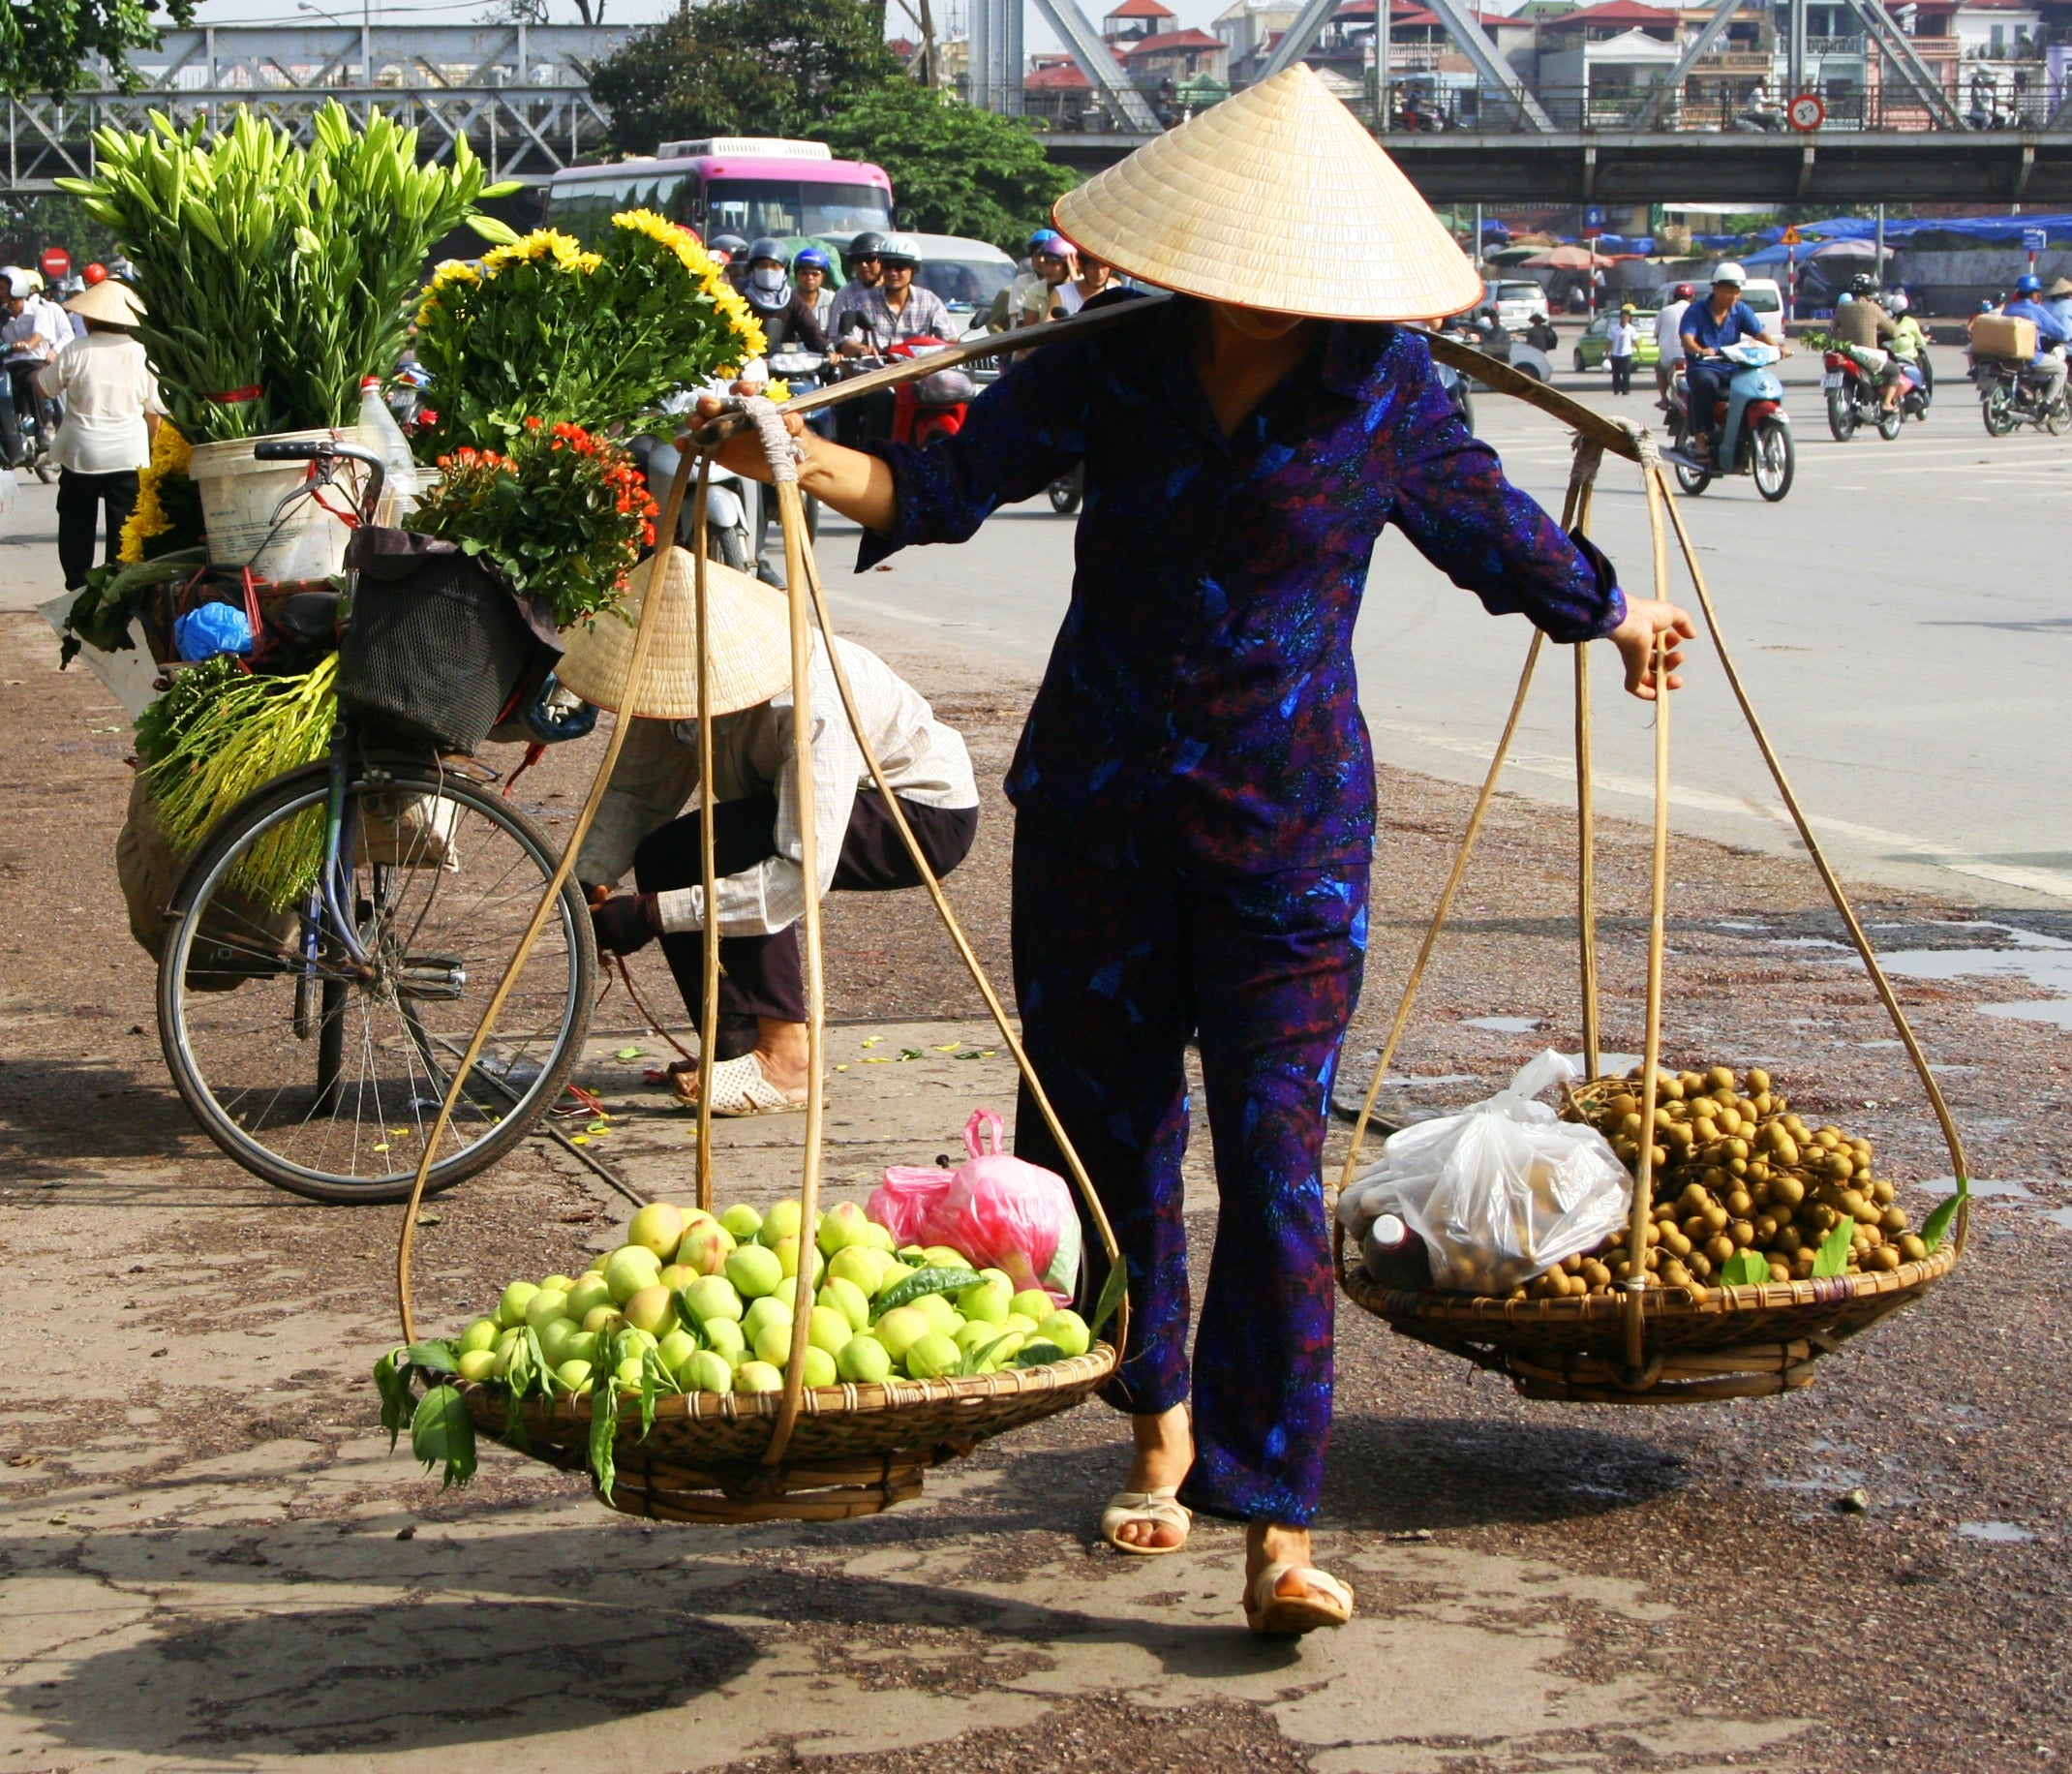 Discover More About Vietnam with these Activities and Games